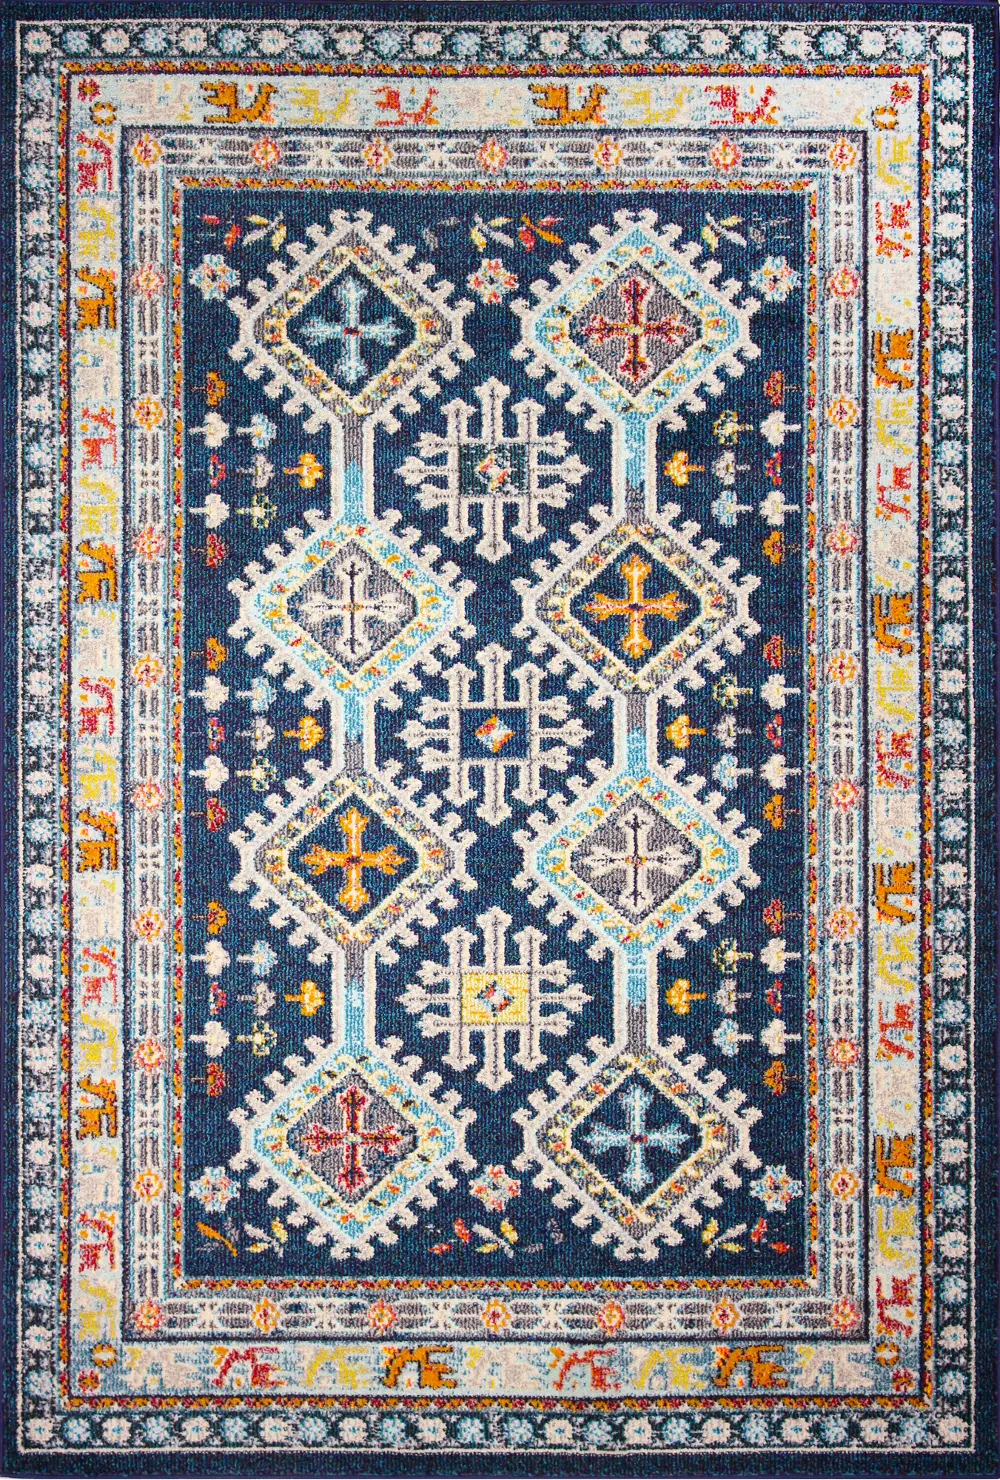 D113-NV-76X96-MH116 Dakota 8 x 10 Large Transitional Navy Blue and Ivory Area Rug-1